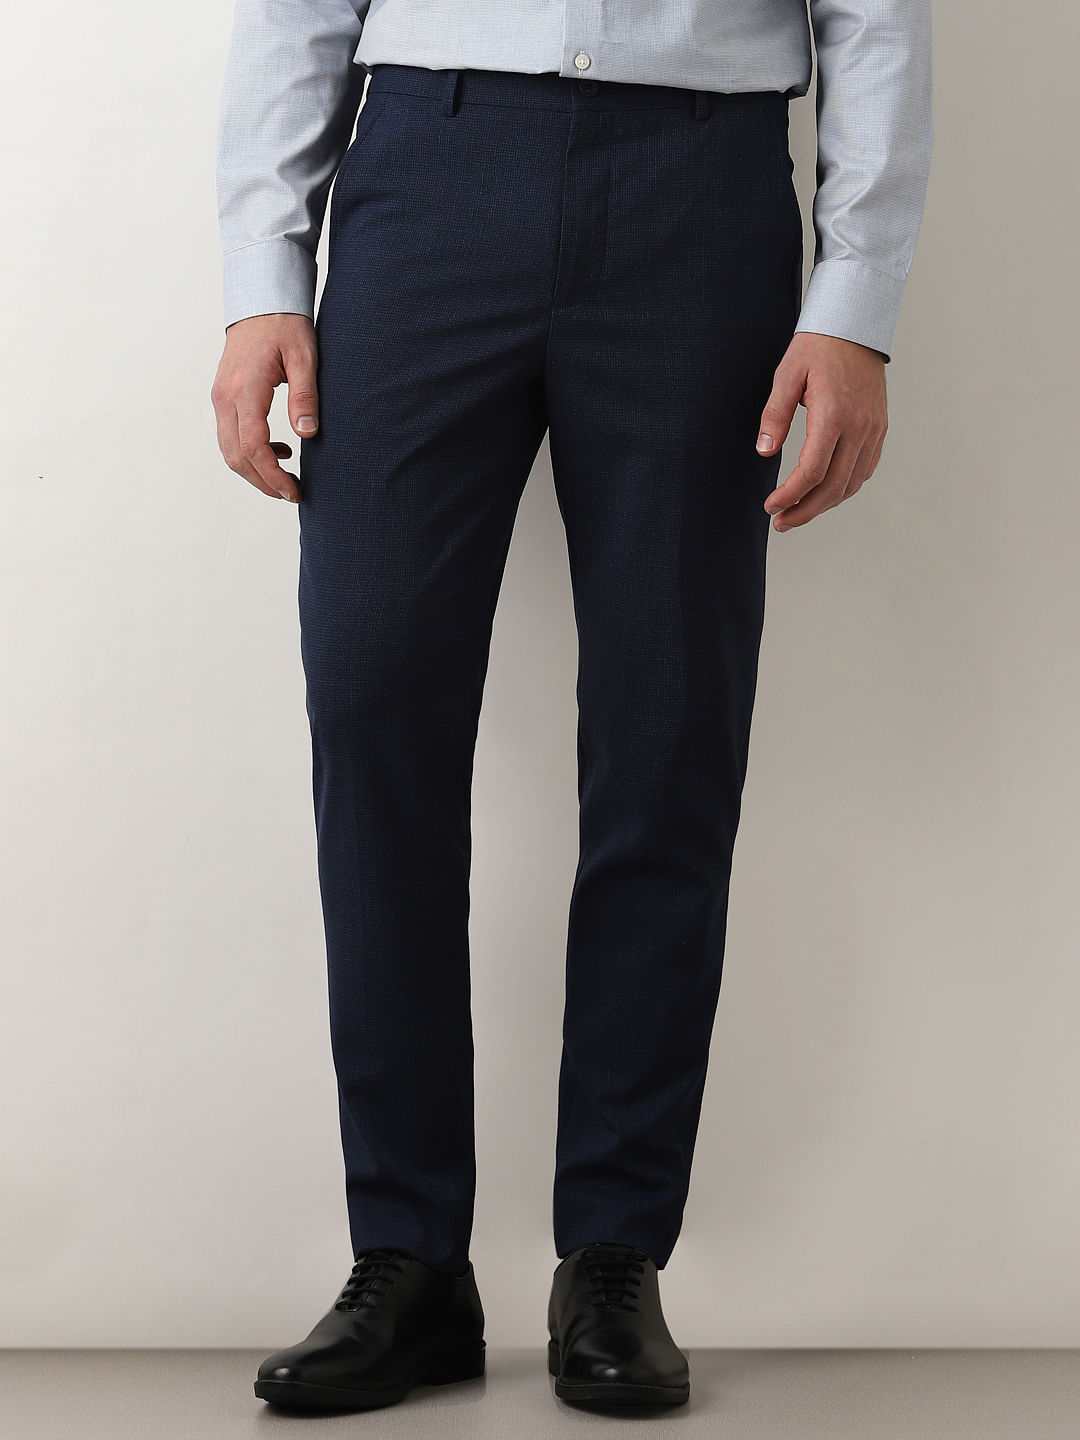 Ketley Mens Formal Trouser Navy Blue 3022 in Lucknow at best price by Garg  Apparels - Justdial